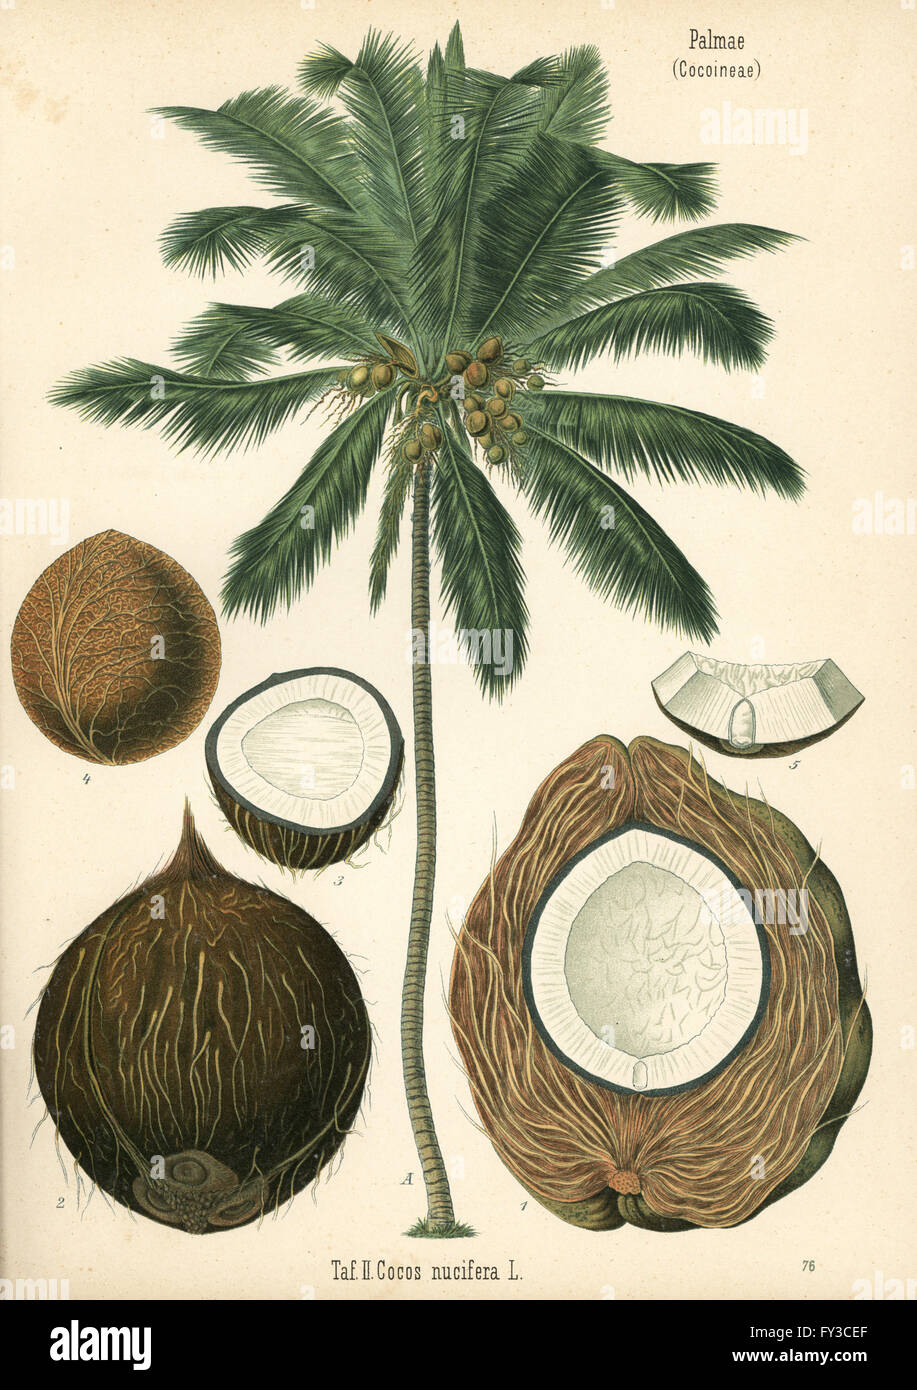 Coconut tree, Cocos nucifera. Chromolithograph after a botanical illustration from Hermann Adolph Koehler's Medicinal Plants, edited by Gustav Pabst, Koehler, Germany, 1887. Stock Photo